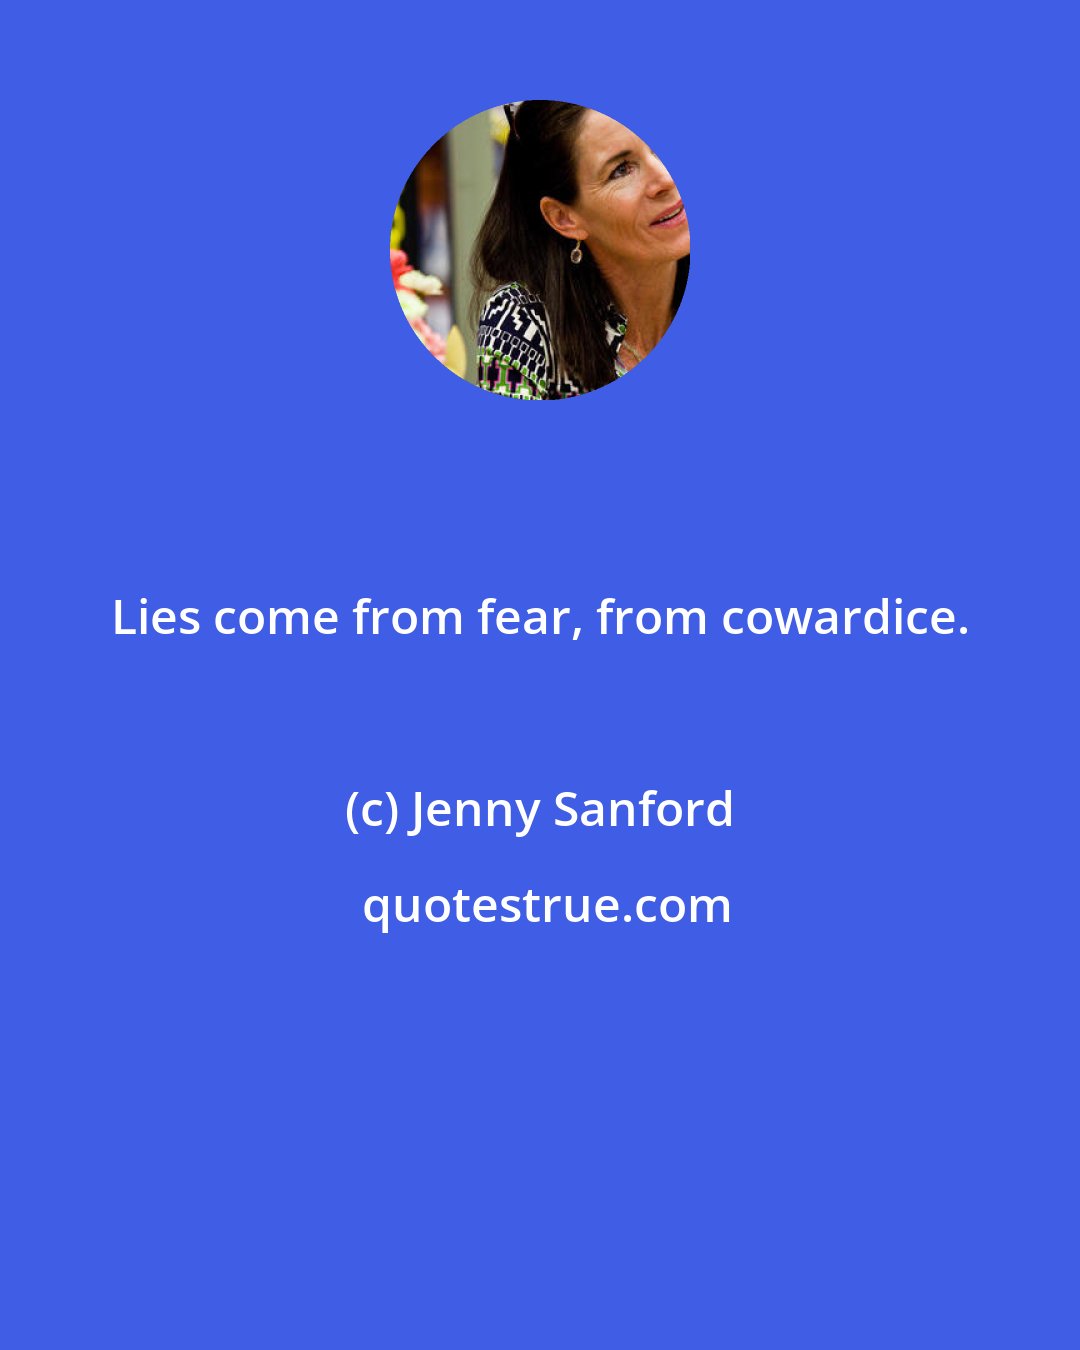 Jenny Sanford: Lies come from fear, from cowardice.